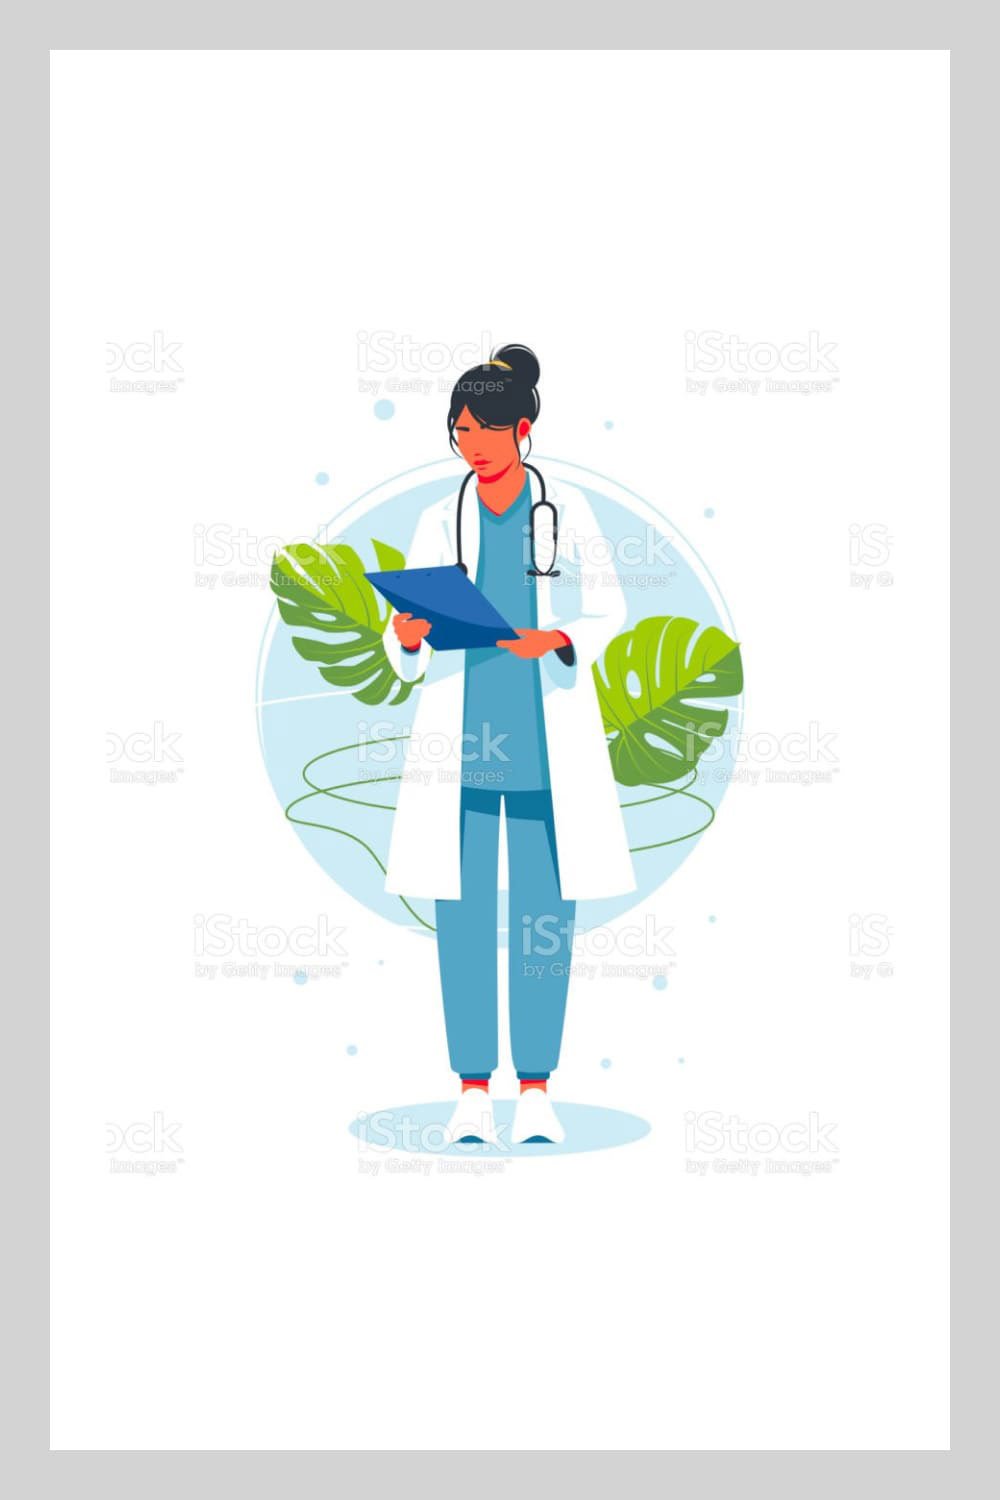 The woman doctor with a stethoscope reviewing, analyzes the treatment report, patient_s condition or laboratory test report. Checklist on health information of diagnosis.